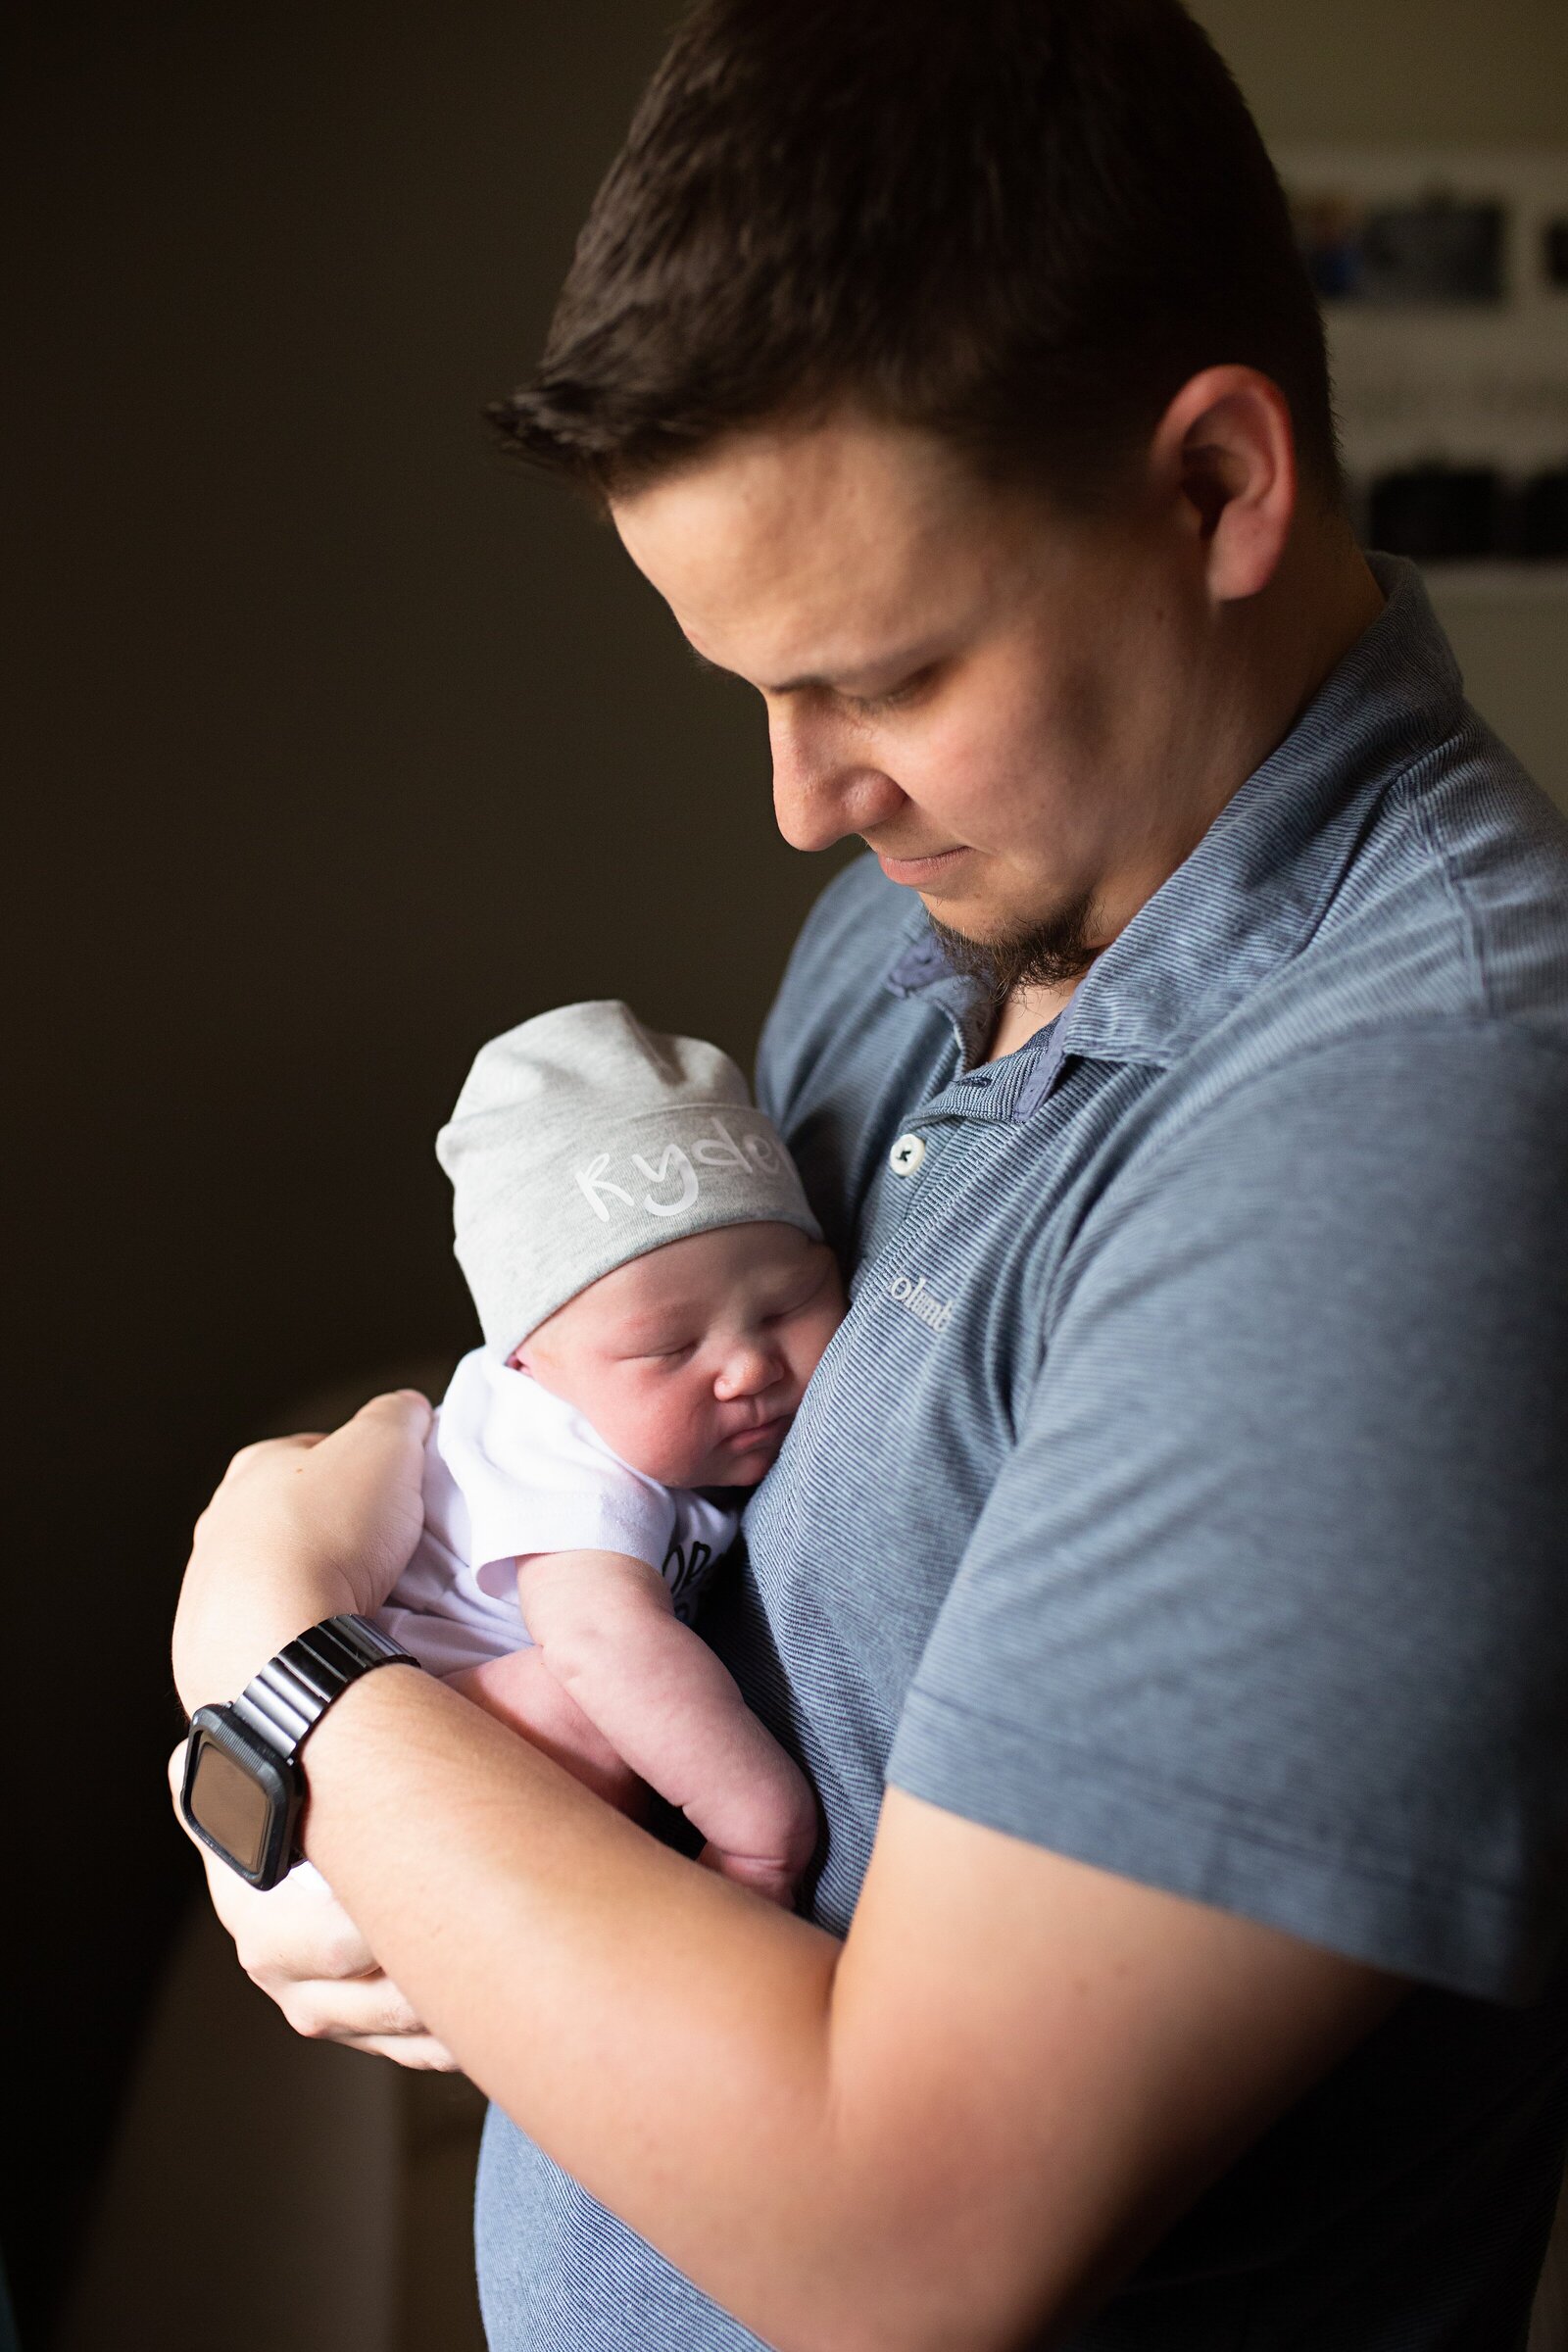 Daddy holding and admiring newborn son during newborn photo session